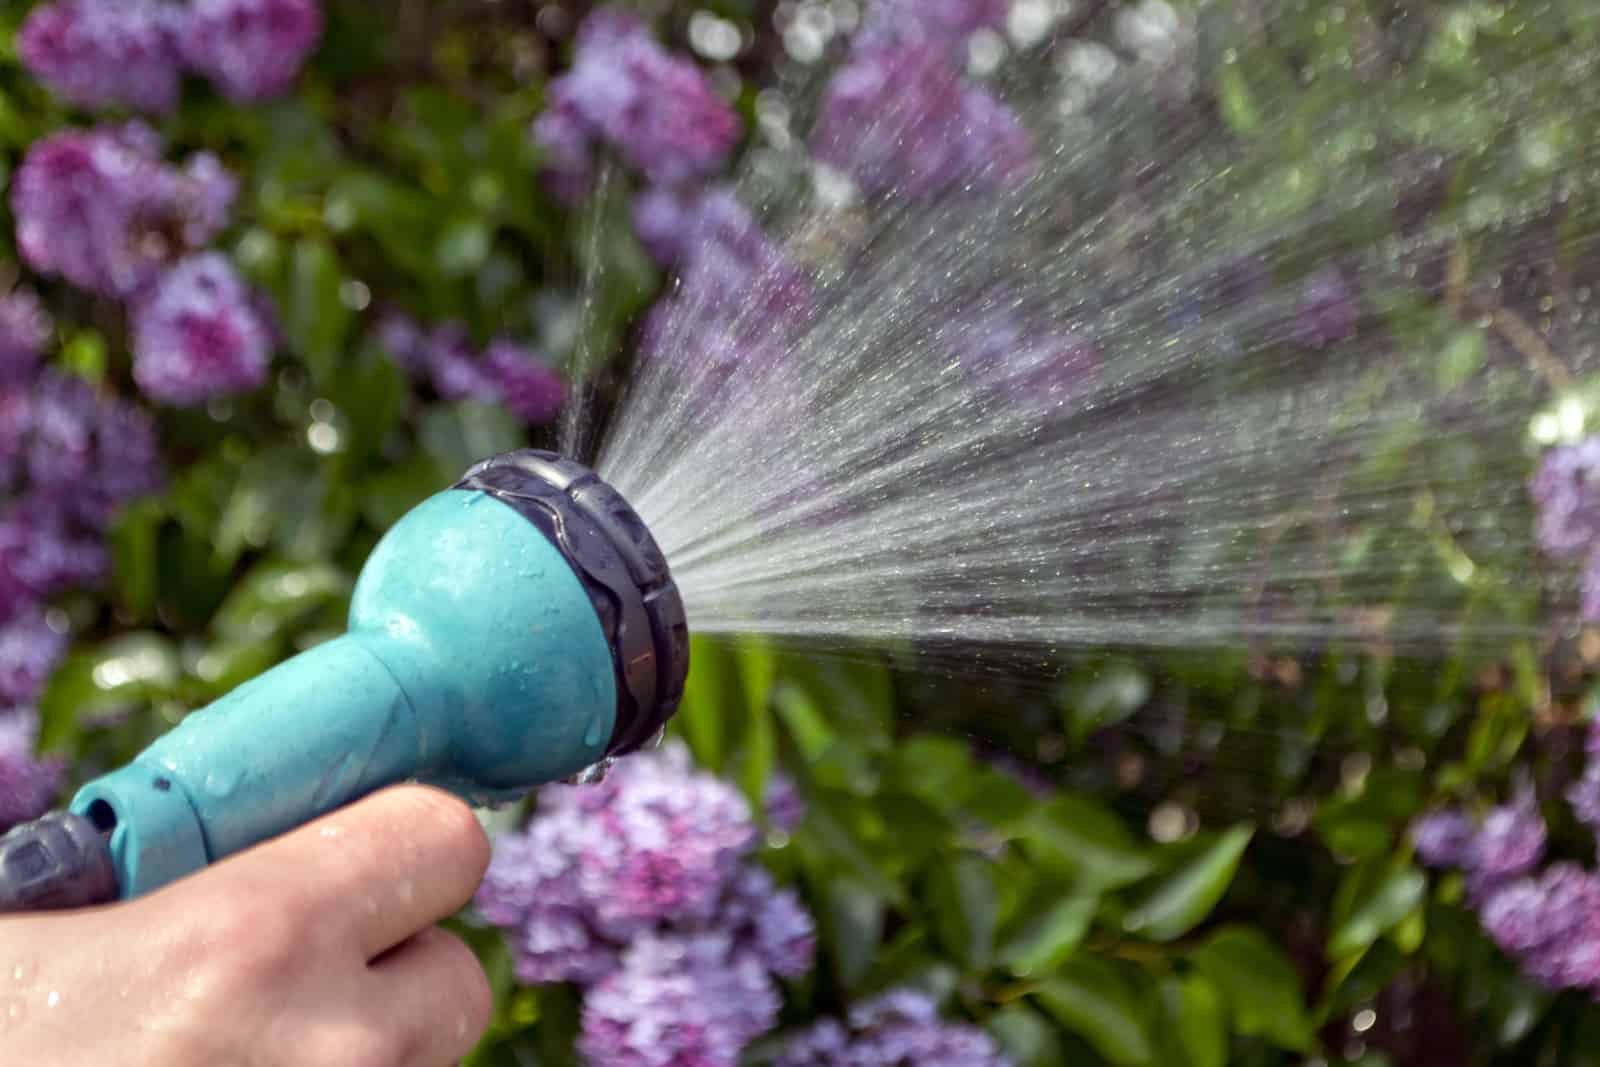 watering plants with too much pressure